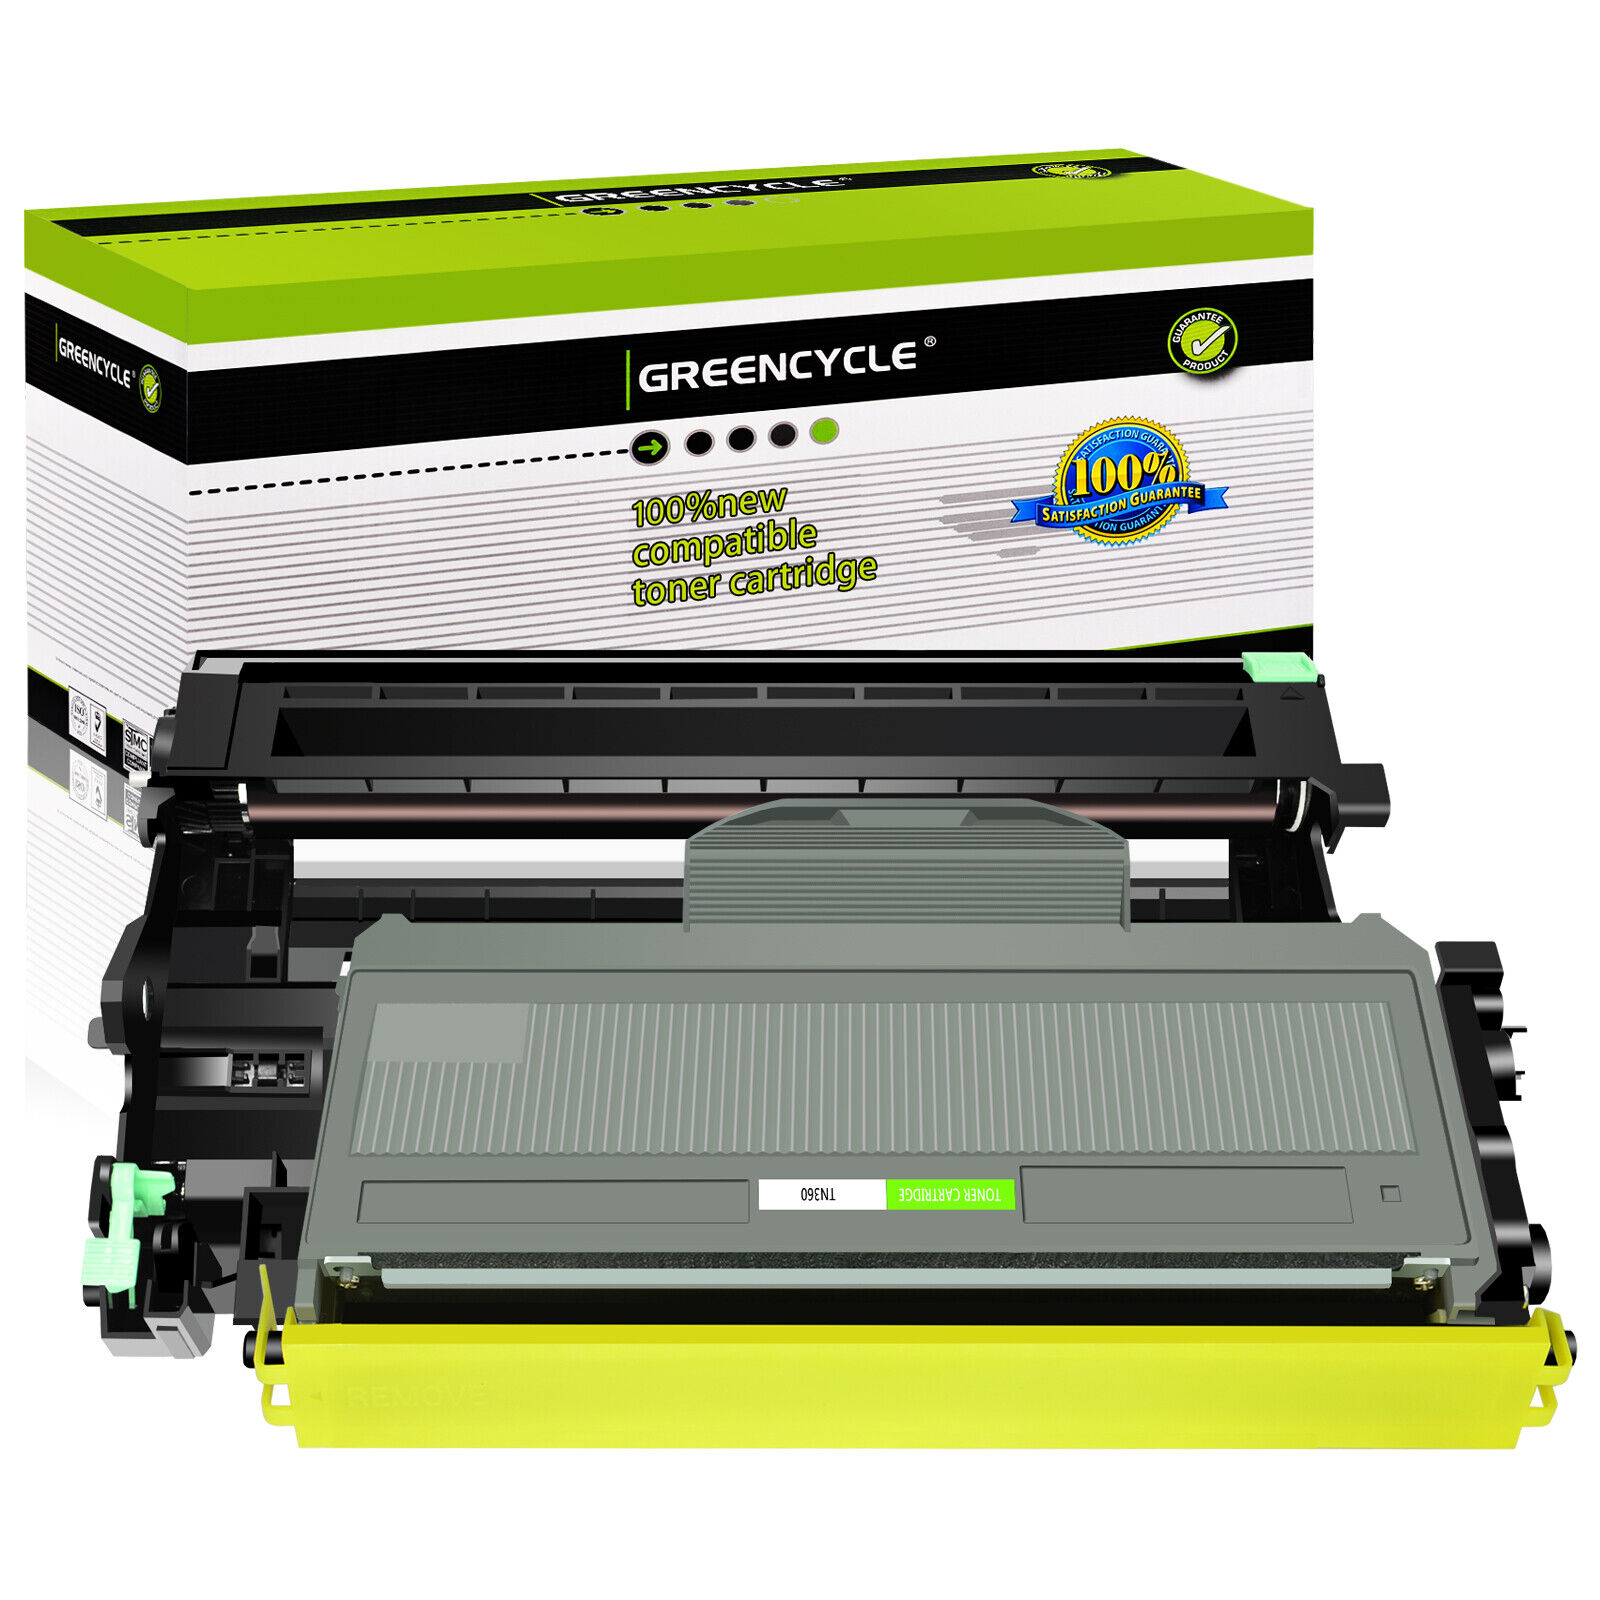 TN360 Toner Cartridge + DR360 Drum Unit For Brother HL-2140 2170W MFC-7340 7840W